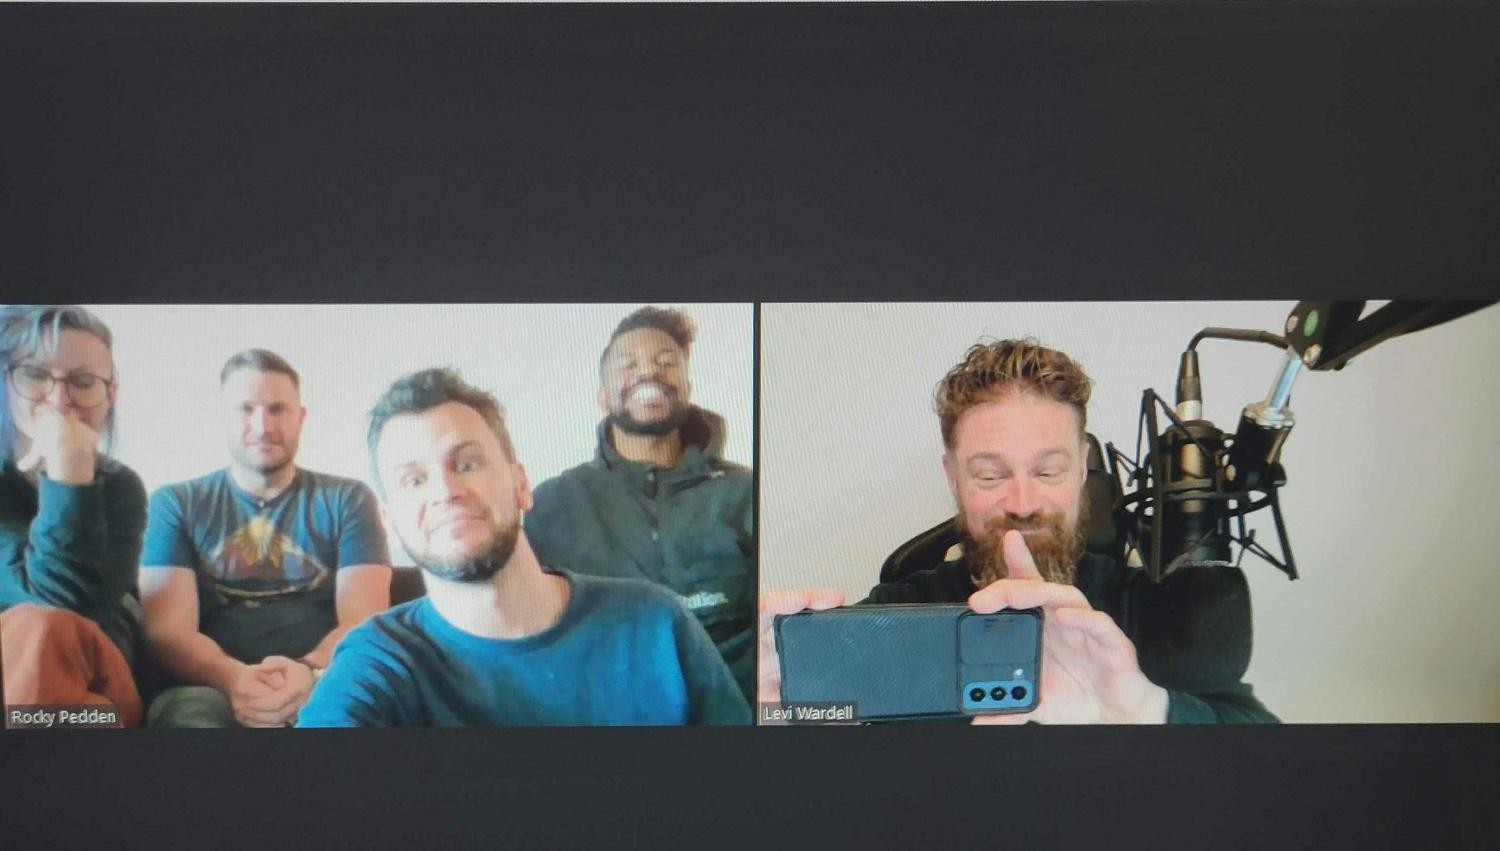 When 4 out of the 5 leaders of a remote-first agency are all in the same room, and the 5th thinks it's photo-worthy.